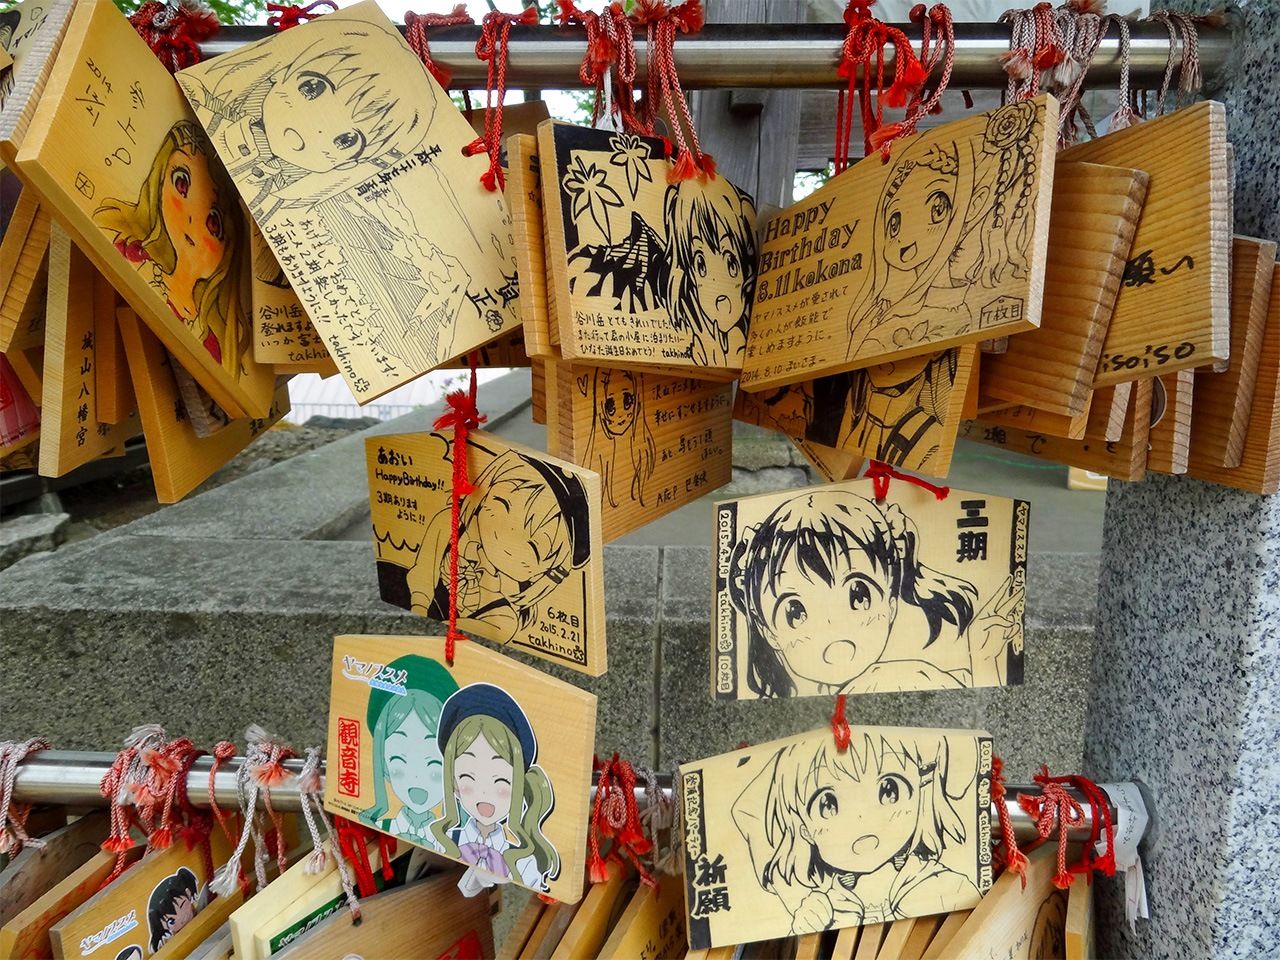 Ema expressing the prayers of anime fans in Kannonji. (© Gianni Simone)